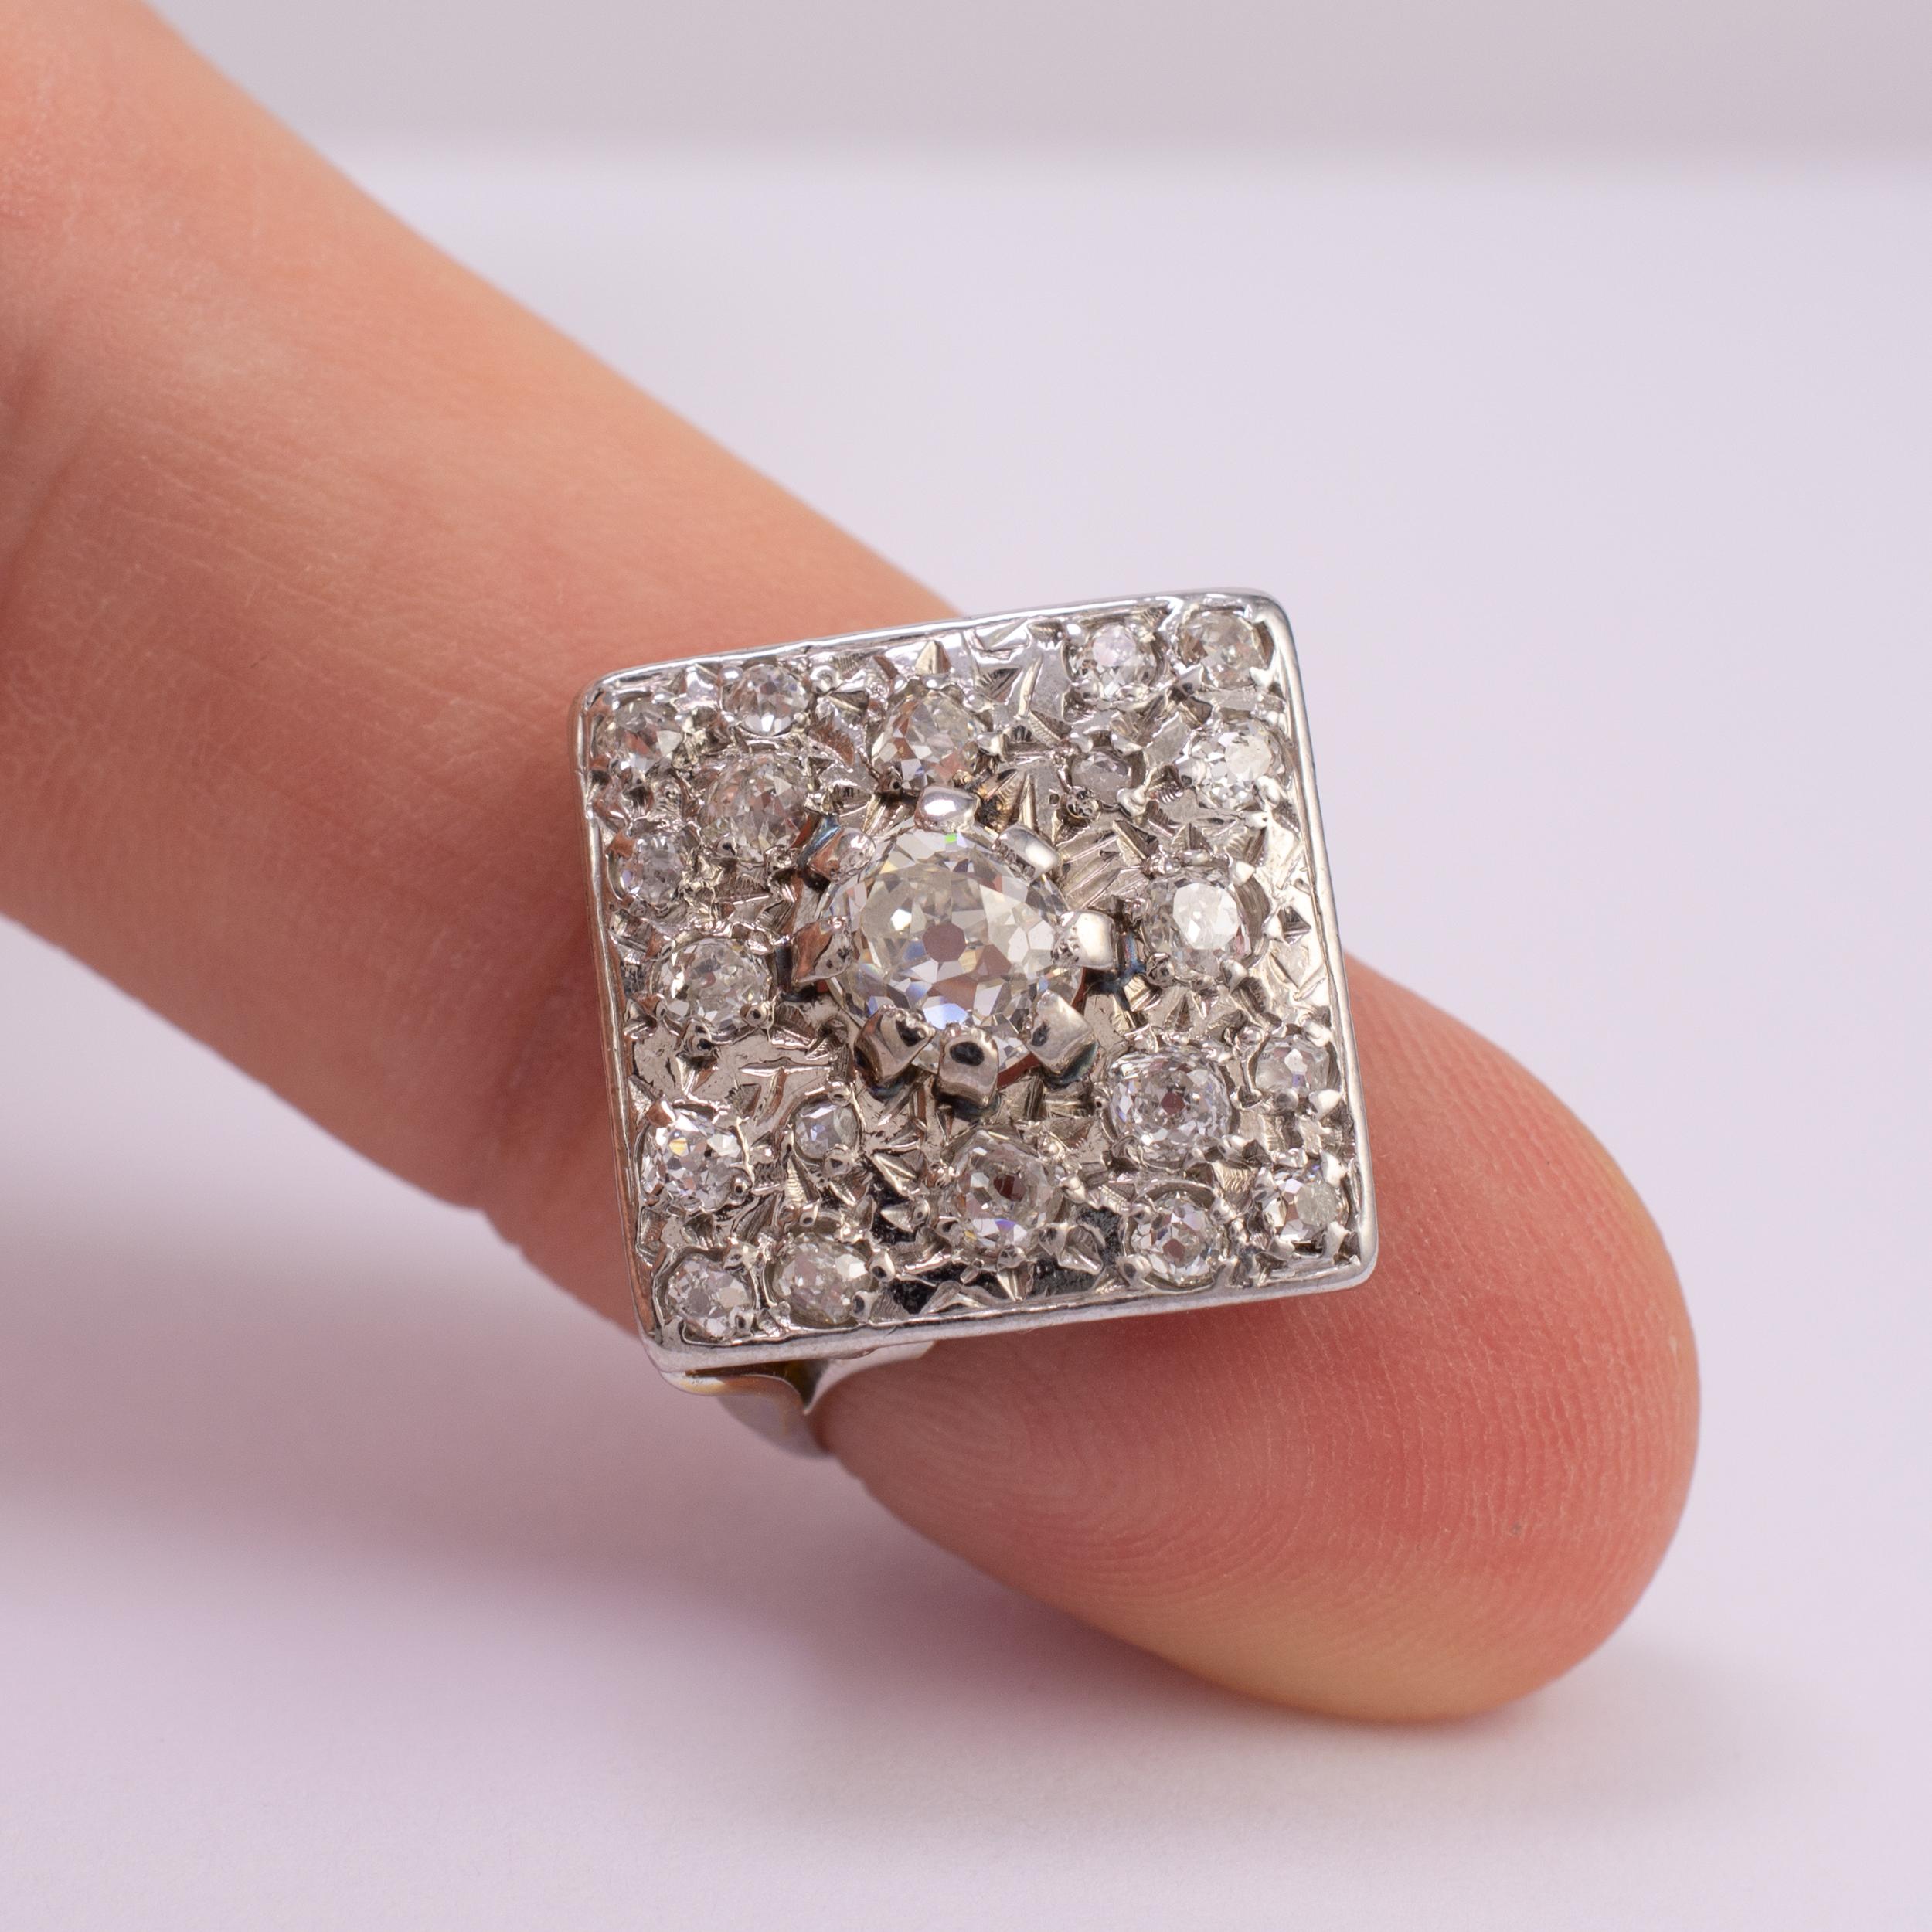 Art Deco statement diamond ring with approx 1.10 carats of old cut diamonds.

The ring features a centrally set old cut diamond of approx. 0.60 carats with twenty various sized accent diamonds arranged into the illusion pressed diamond shape